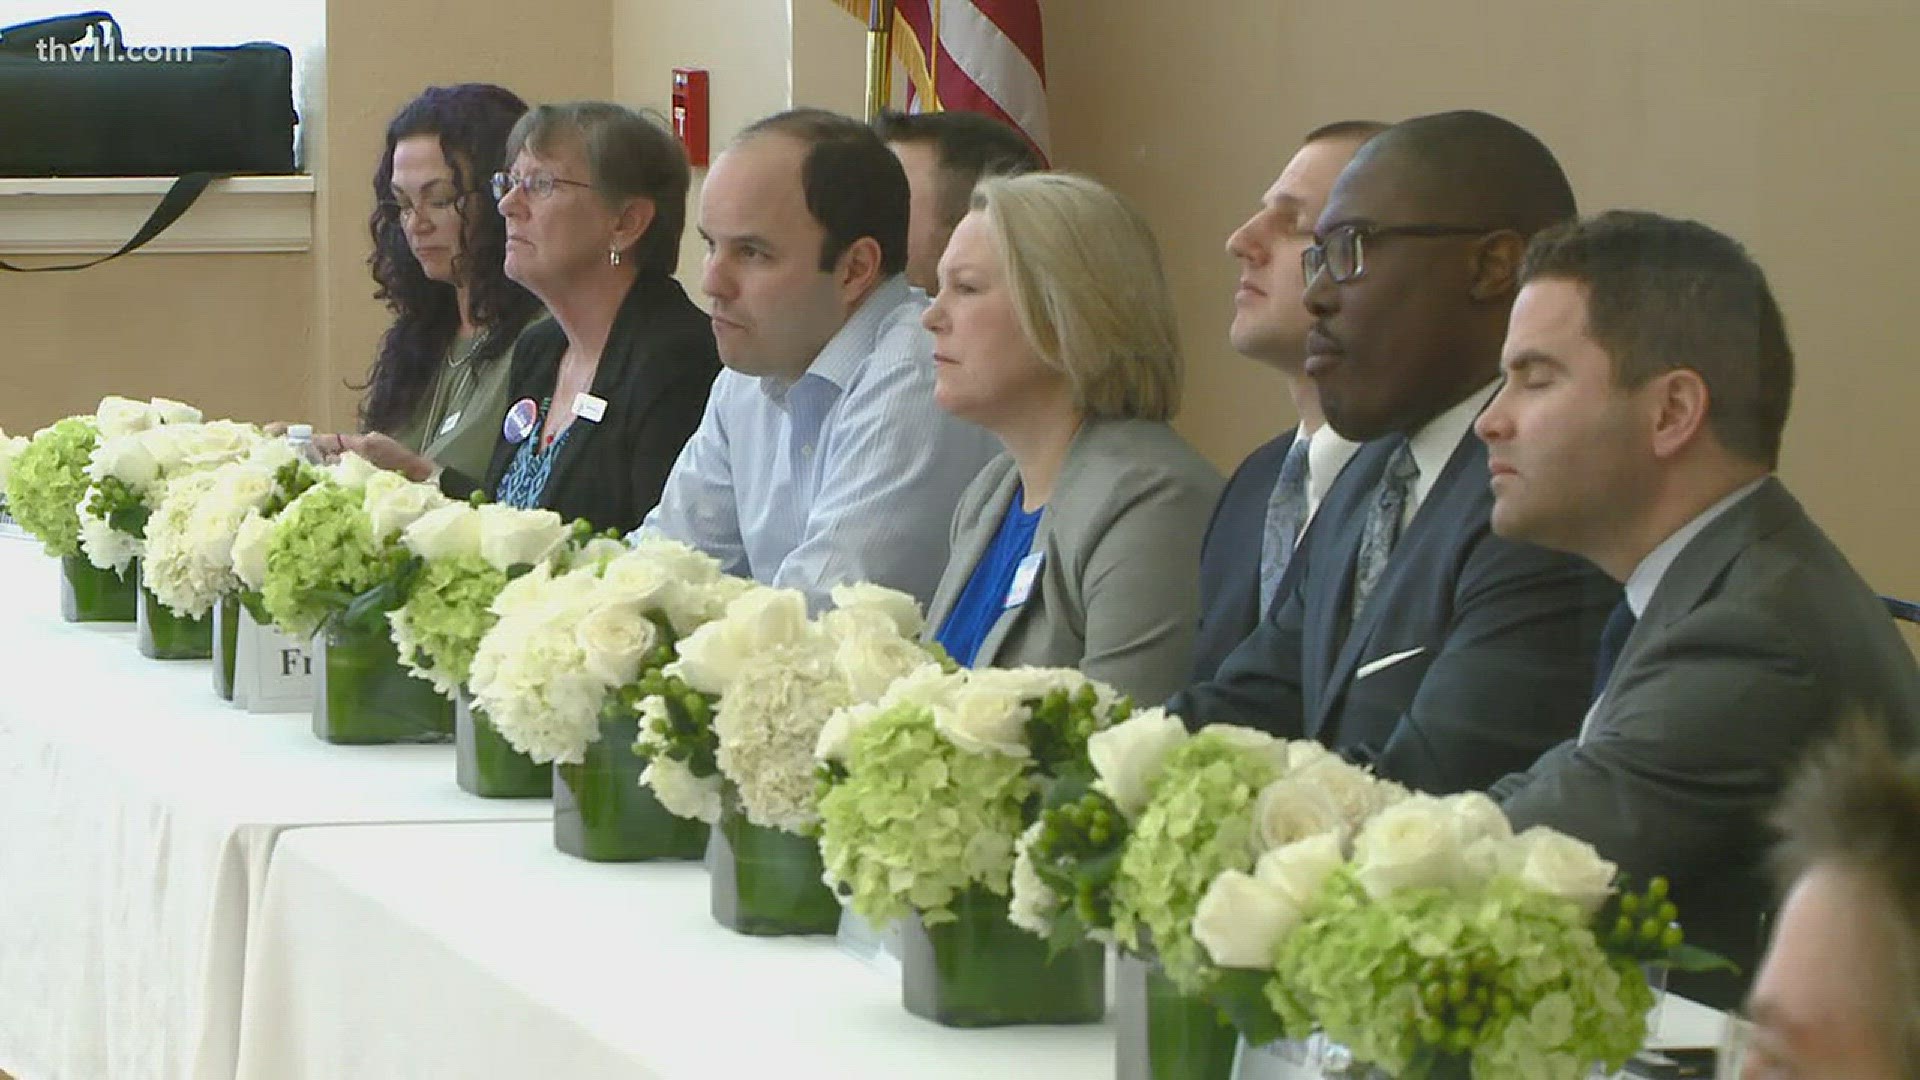 A forum was held with 17 candidates to ask them what will they do to improve the state of homelessness in Arkansas.